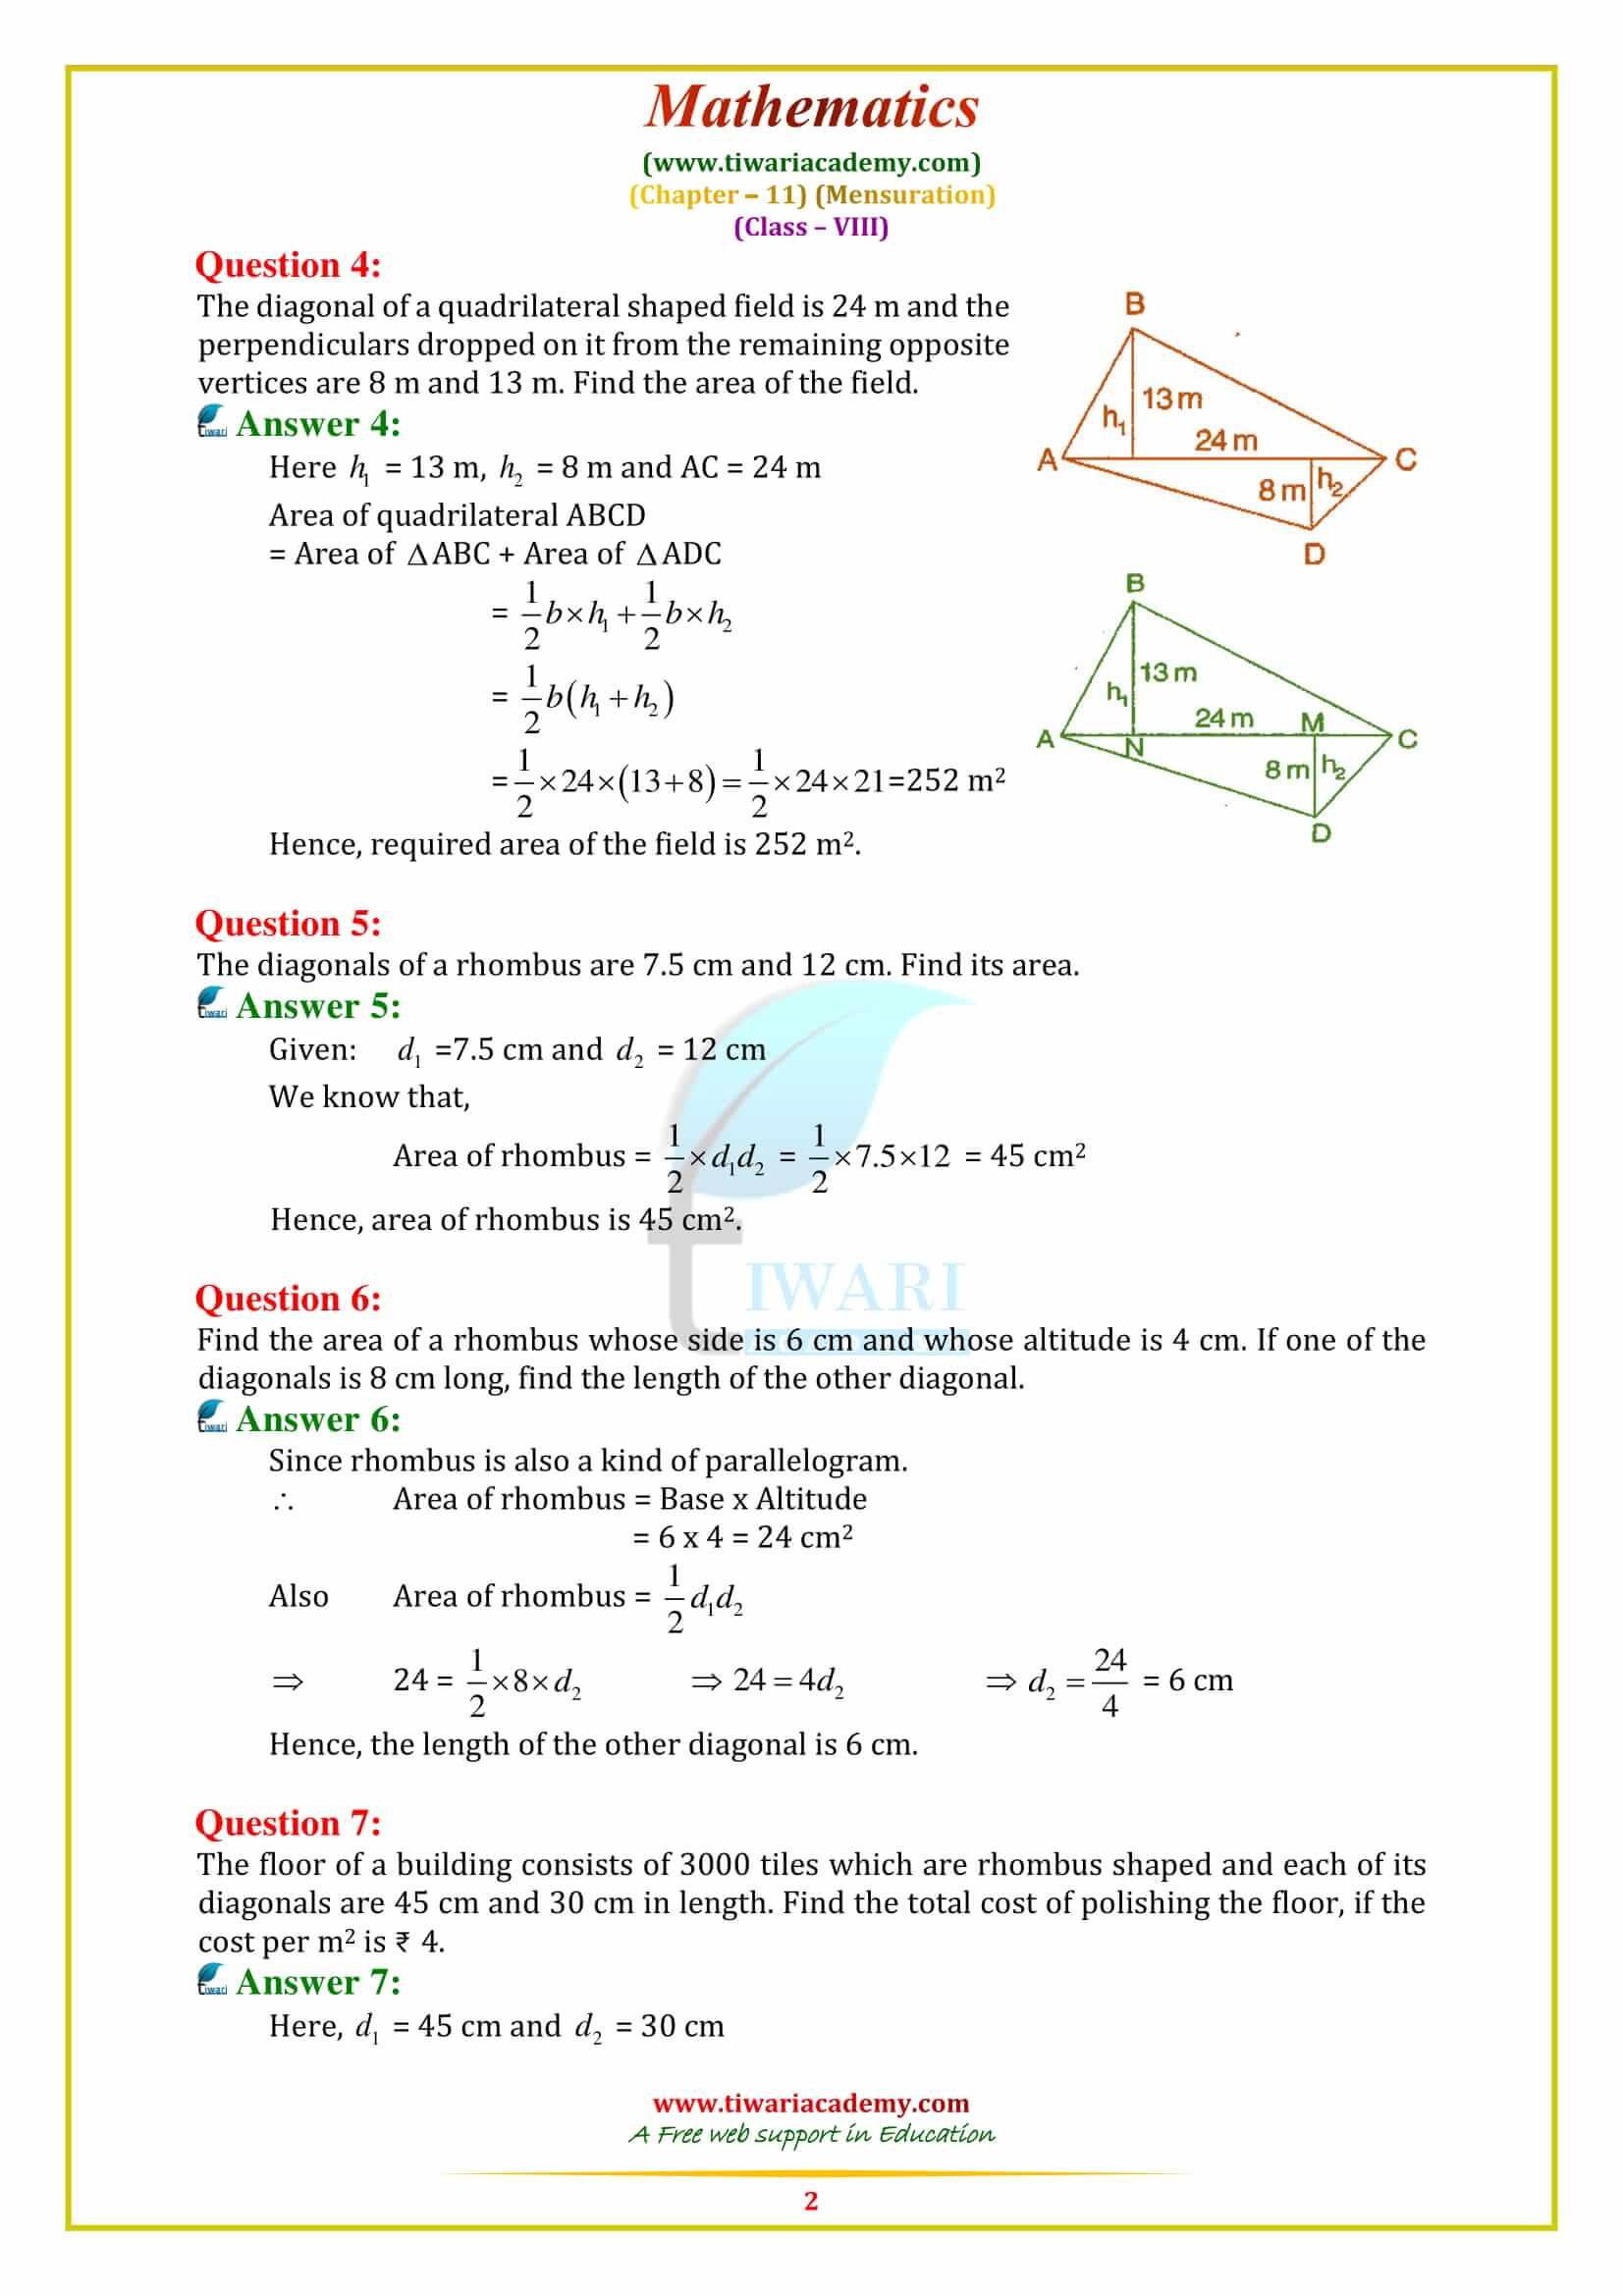 NCERT Solutions for Class 8 Maths Chapter 11 Exercise 11.2 in pdf form